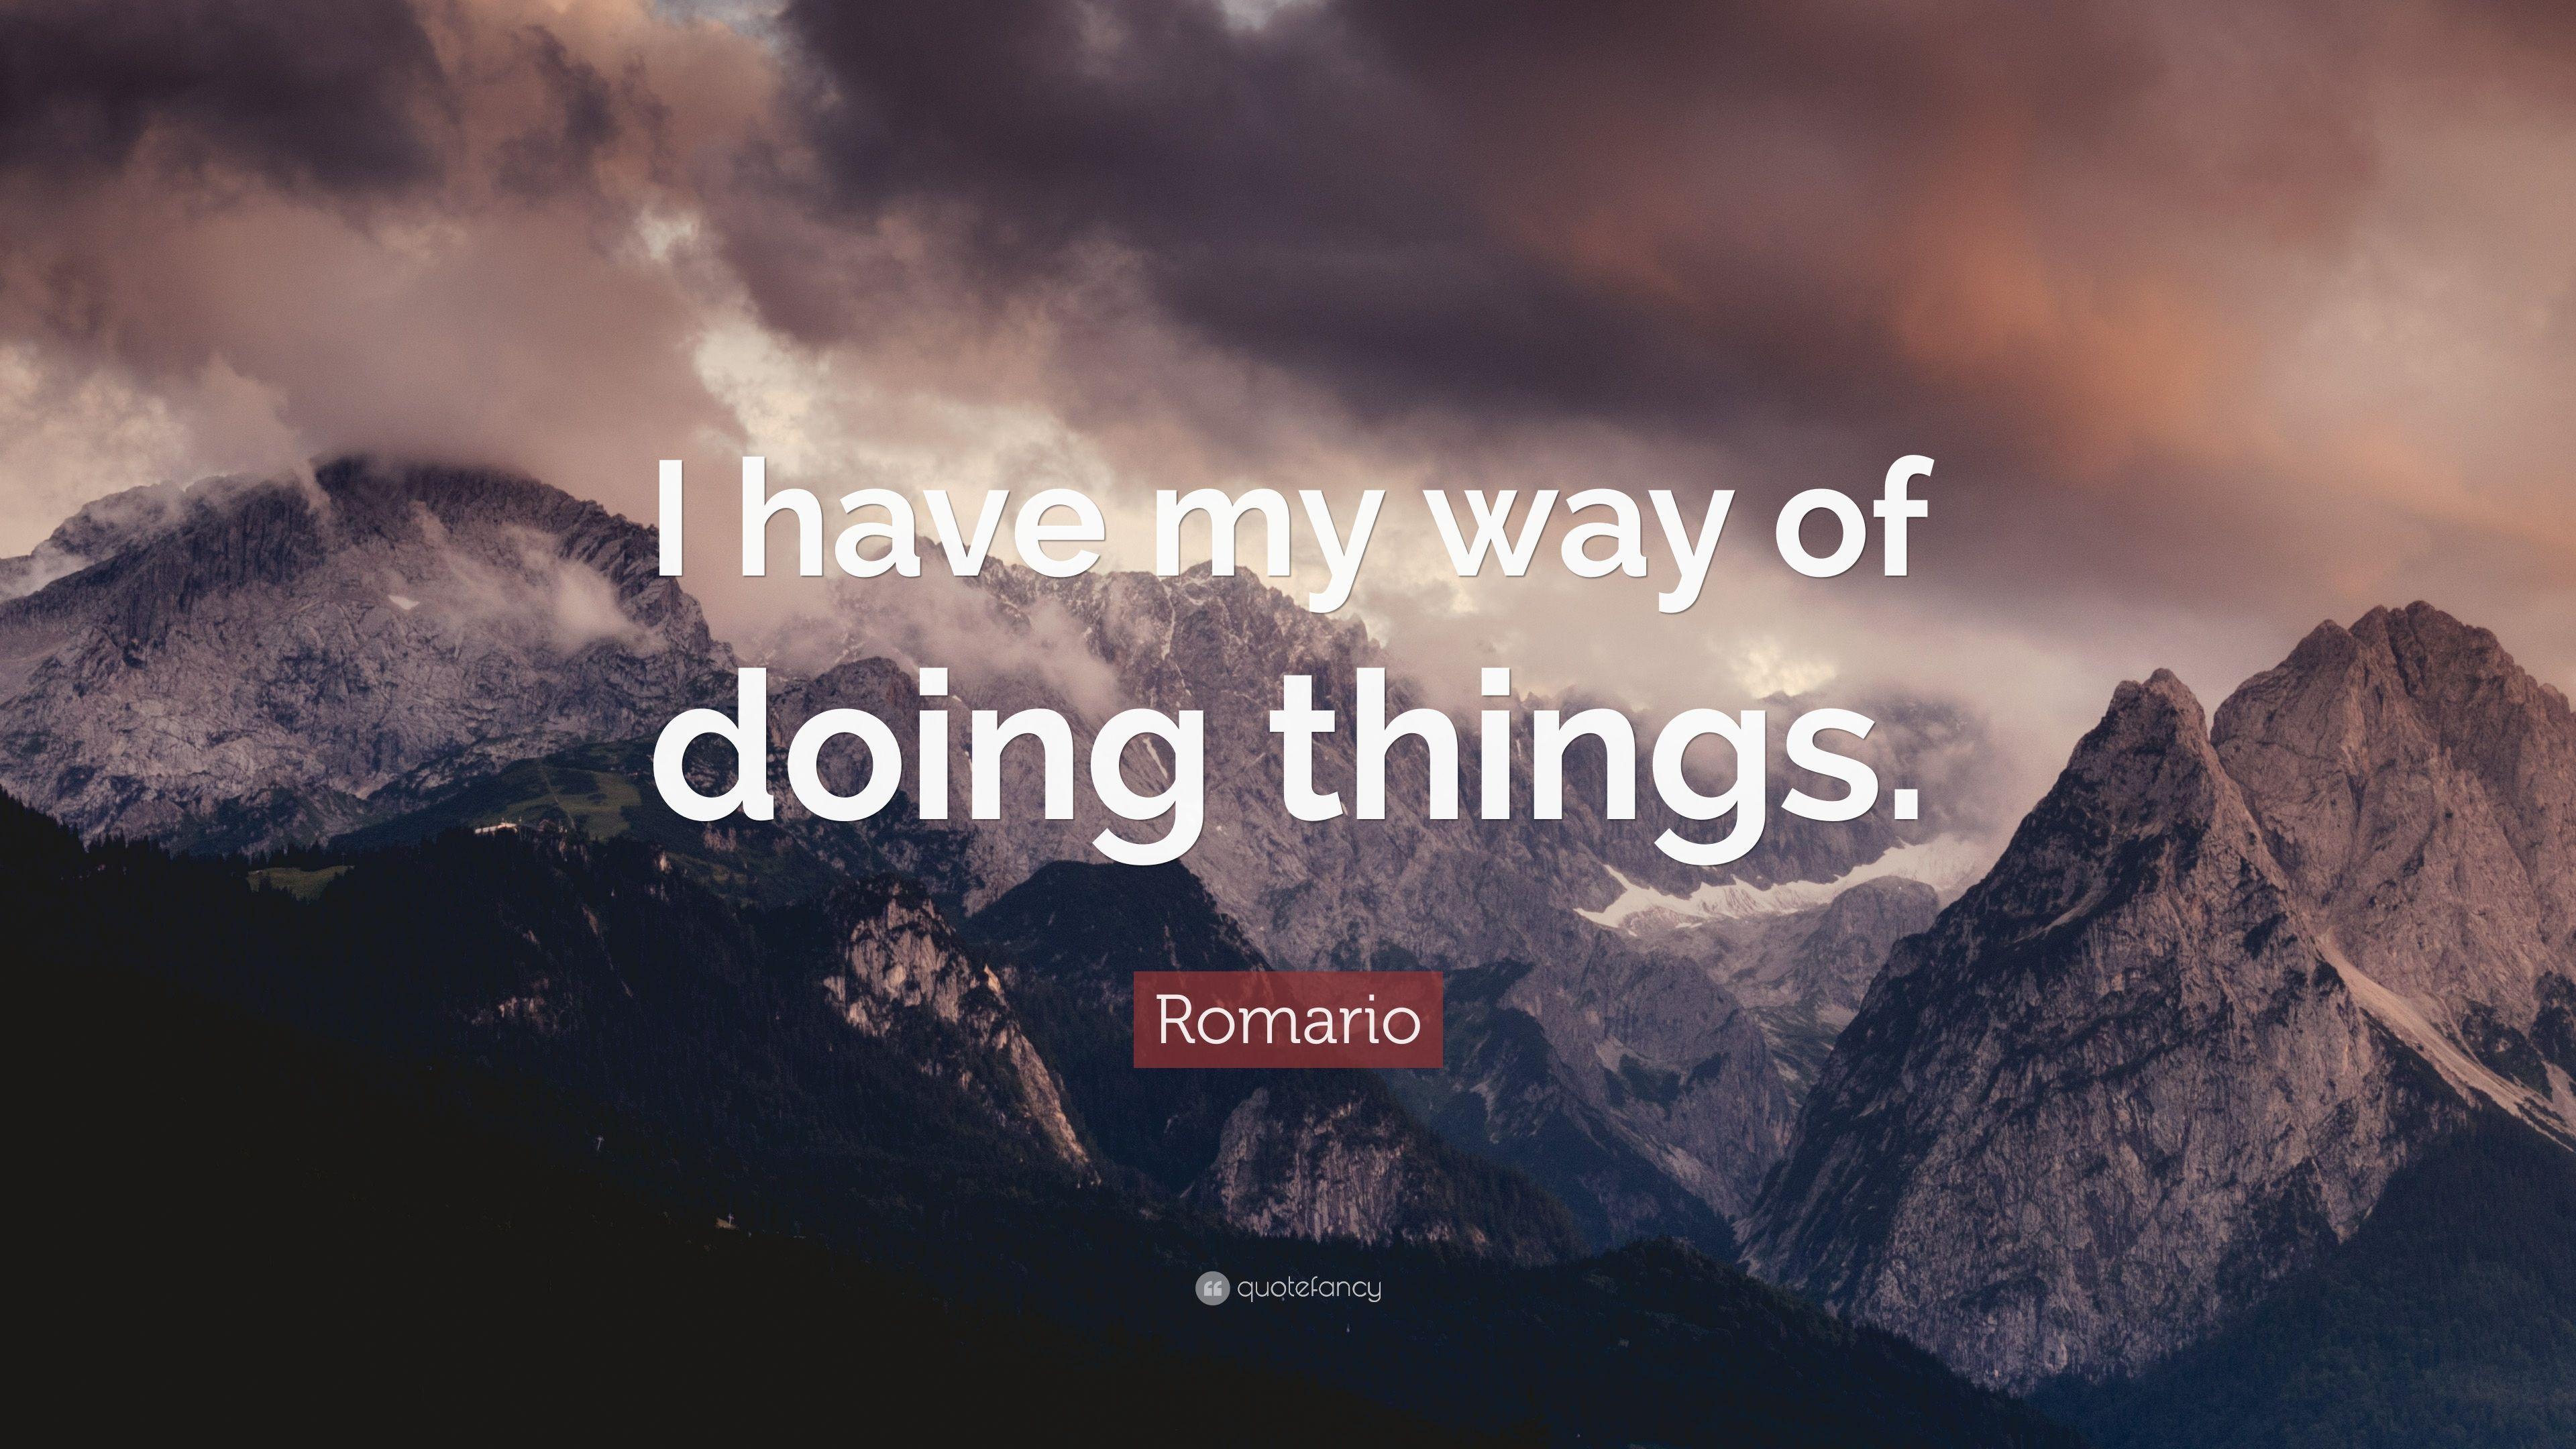 Romario Quote: “I have my way of doing things.” 7 wallpaper